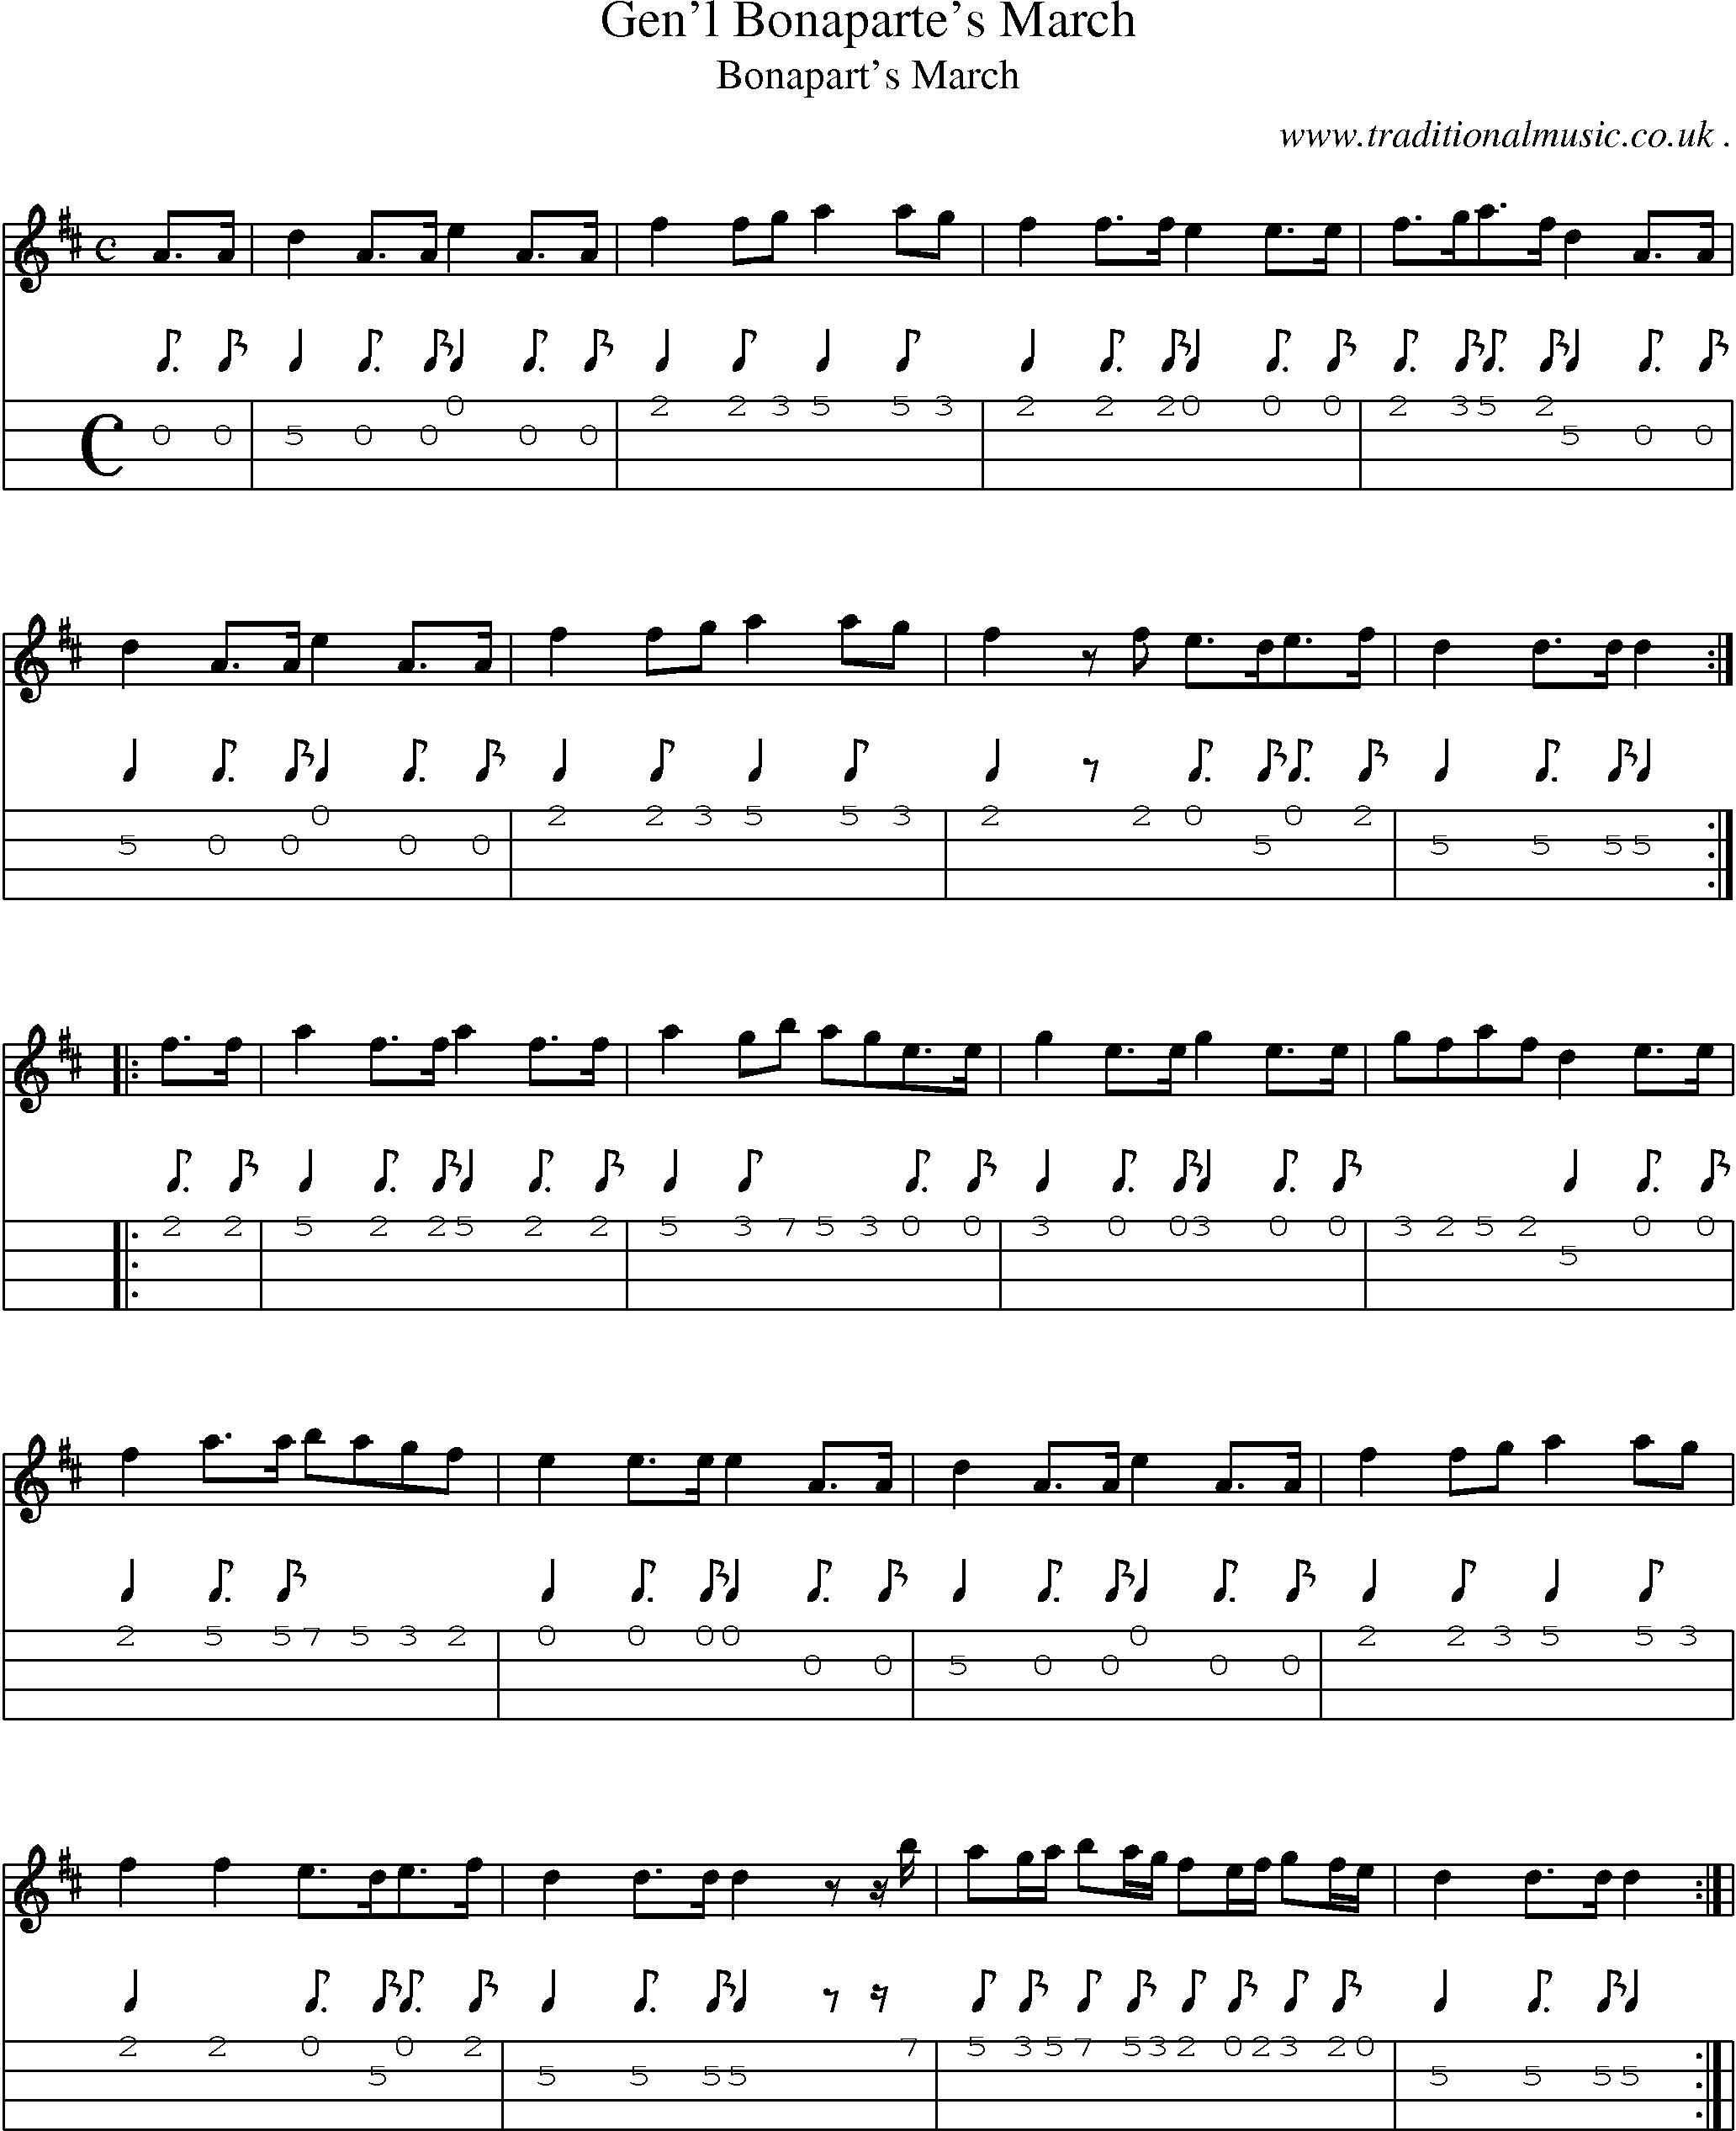 Sheet-Music and Mandolin Tabs for Genl Bonapartes March